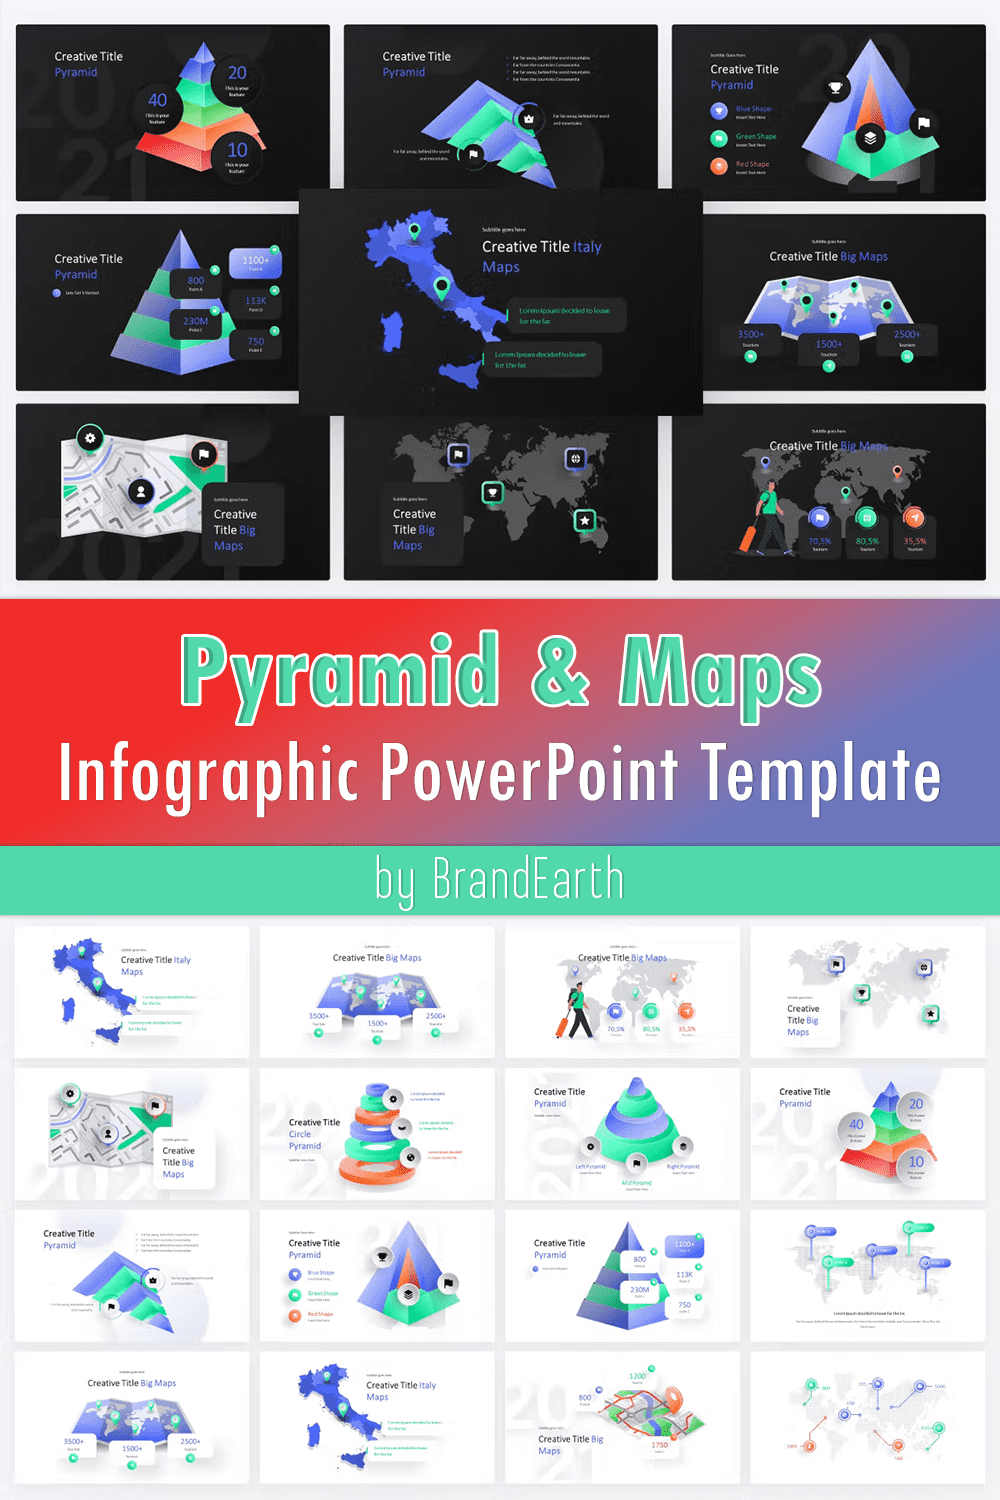 Pyramid & Maps Infographic PowerPoint Template - Pinterest.